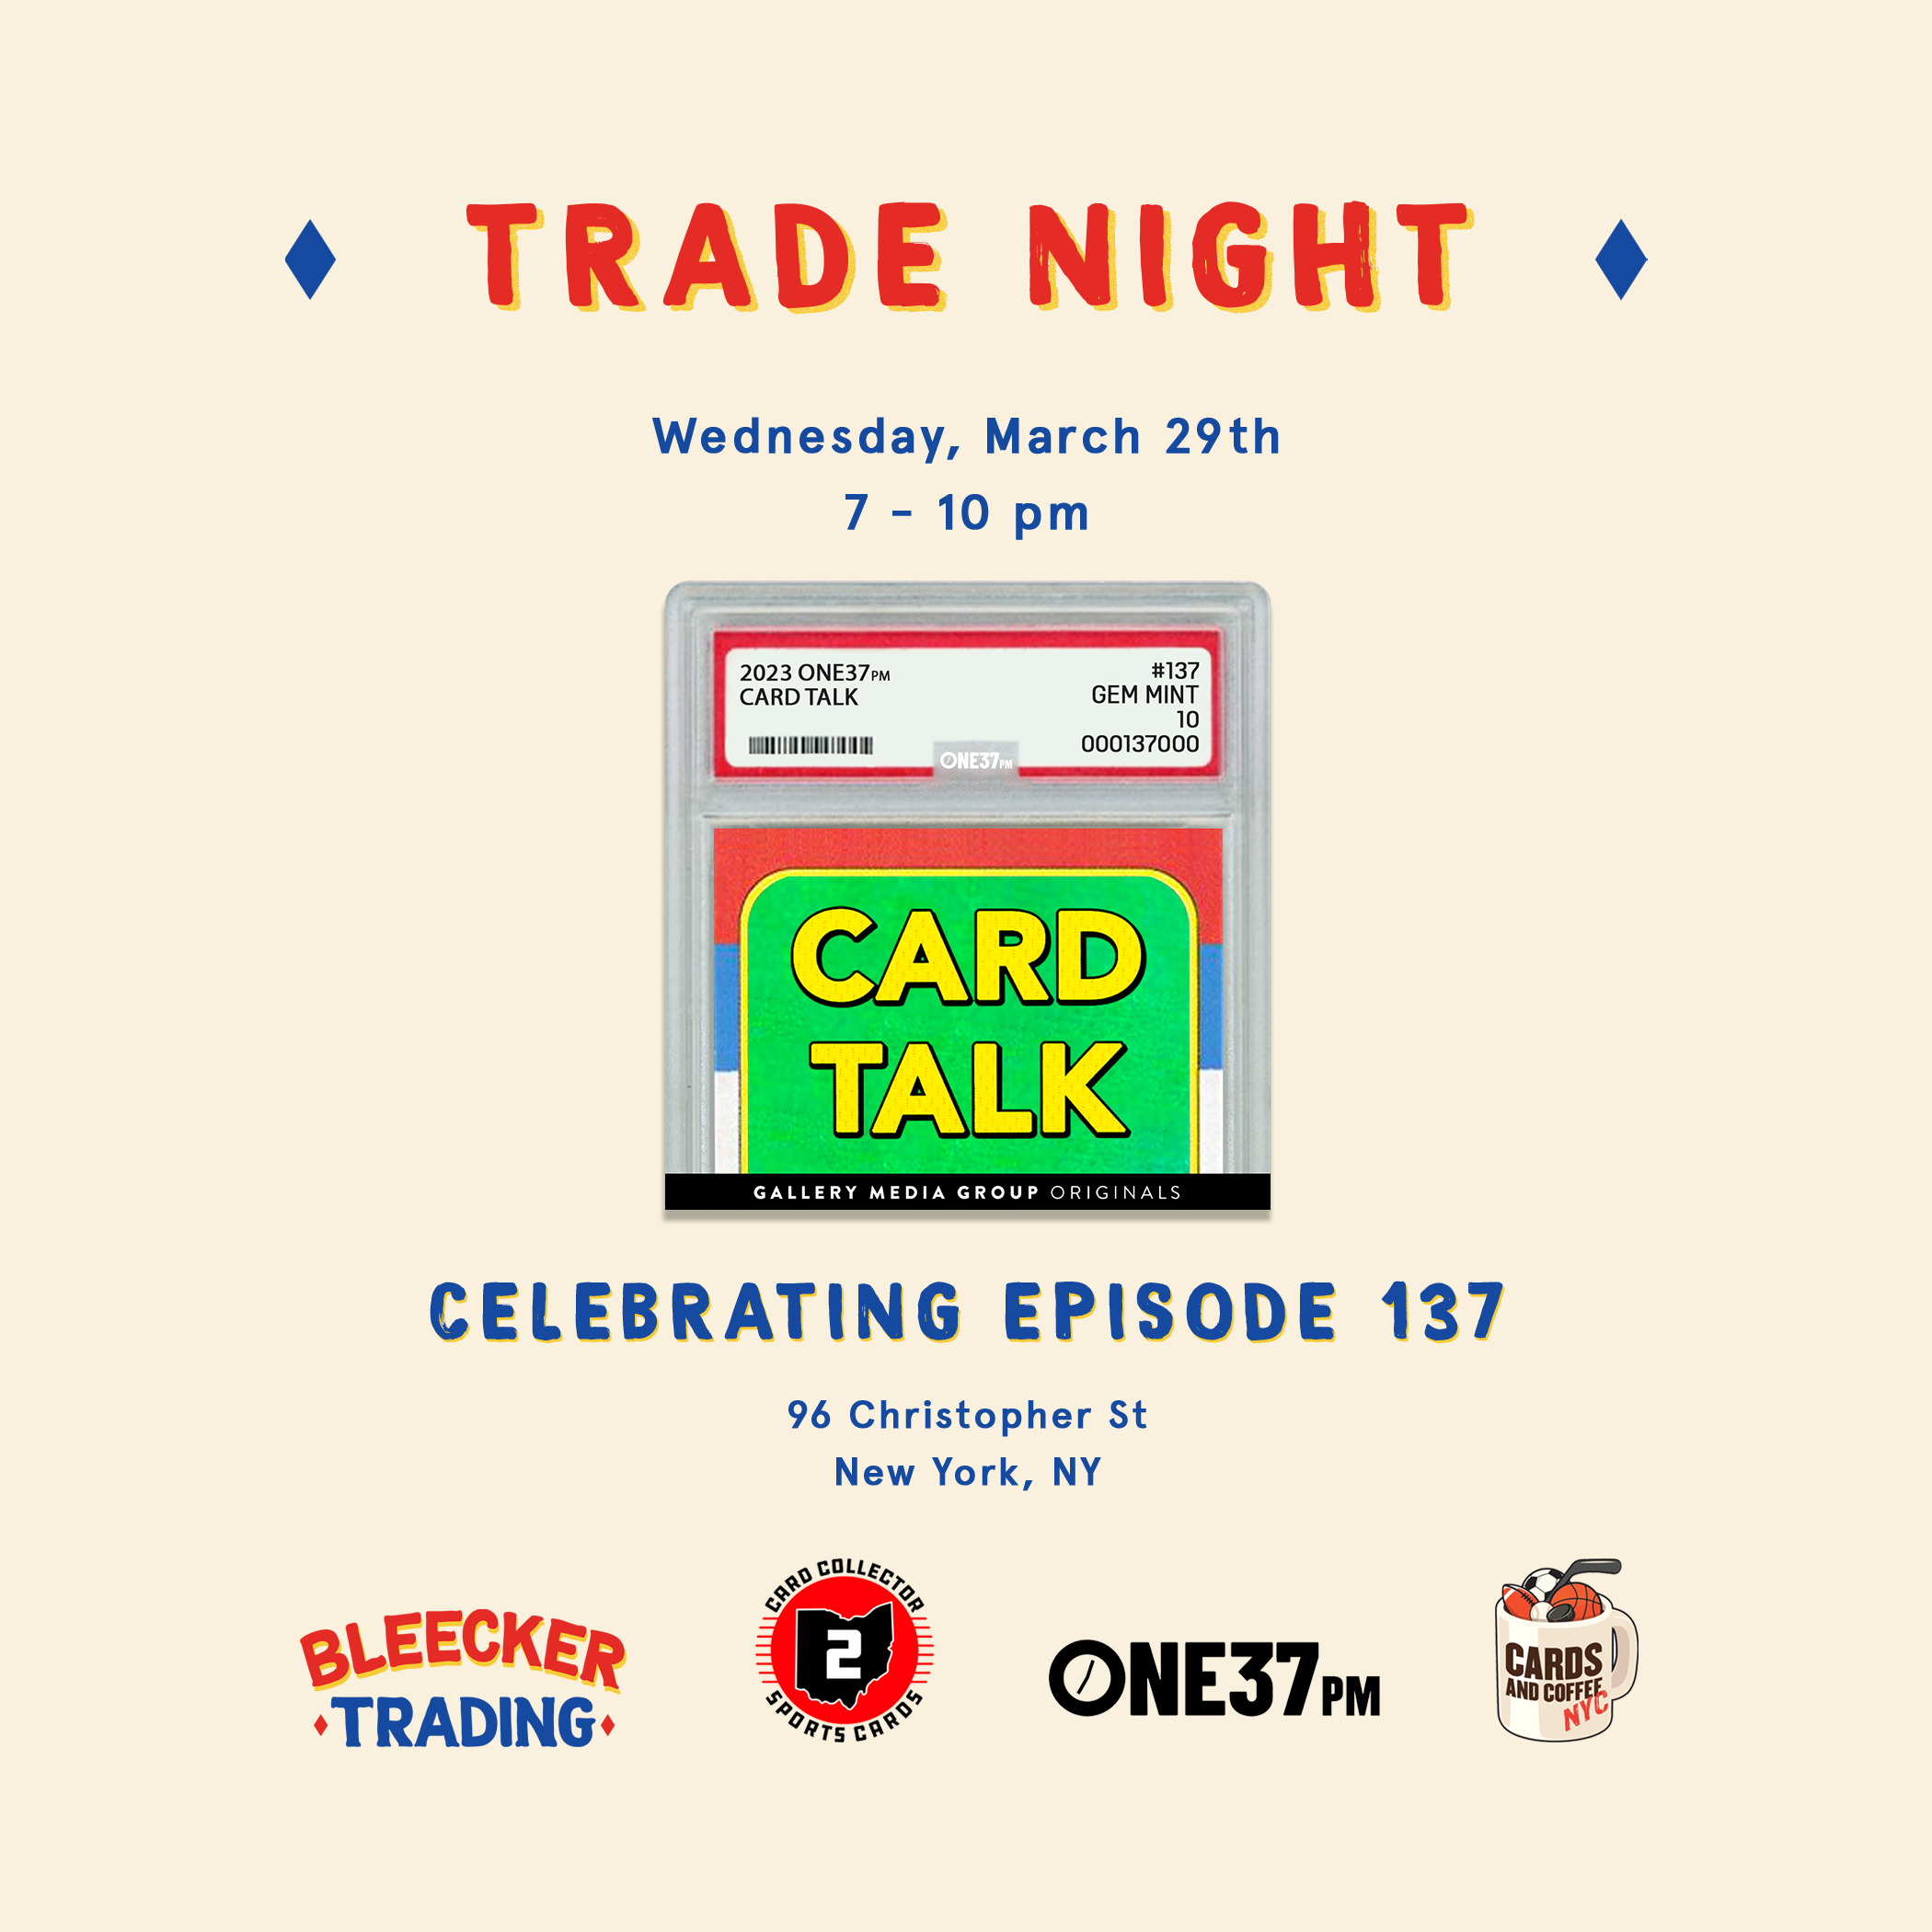 March 29th Trade Night hosted by Card Talk x ONE37pm; Celebrating Episode 137